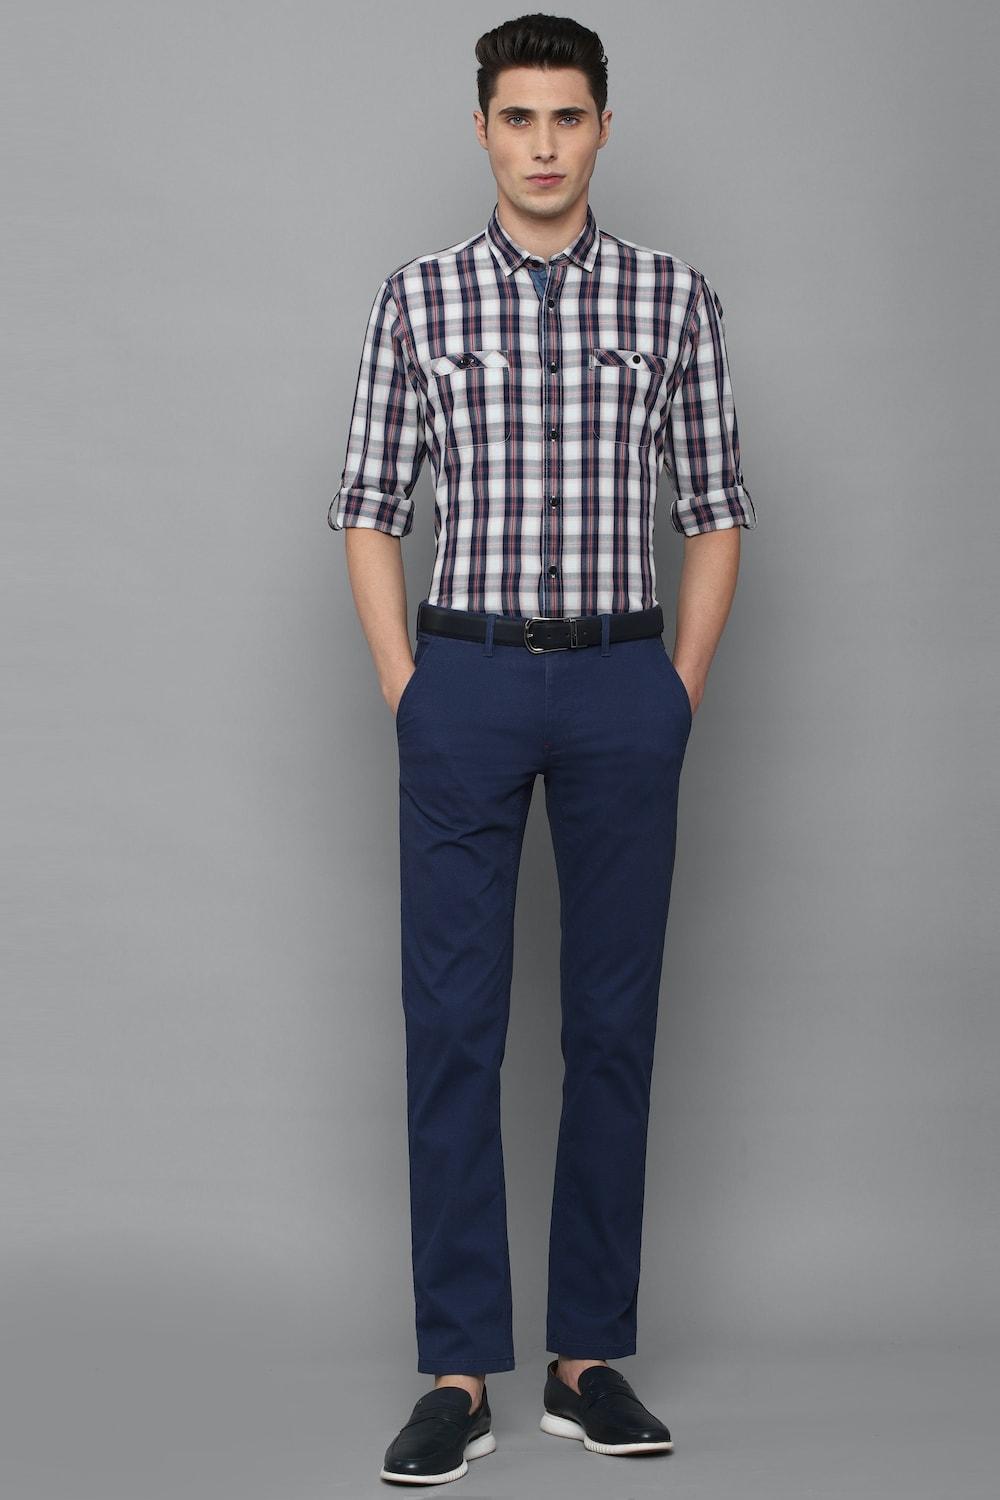 Navy Slim Fit Solid Flat Front Casual Men Trousers